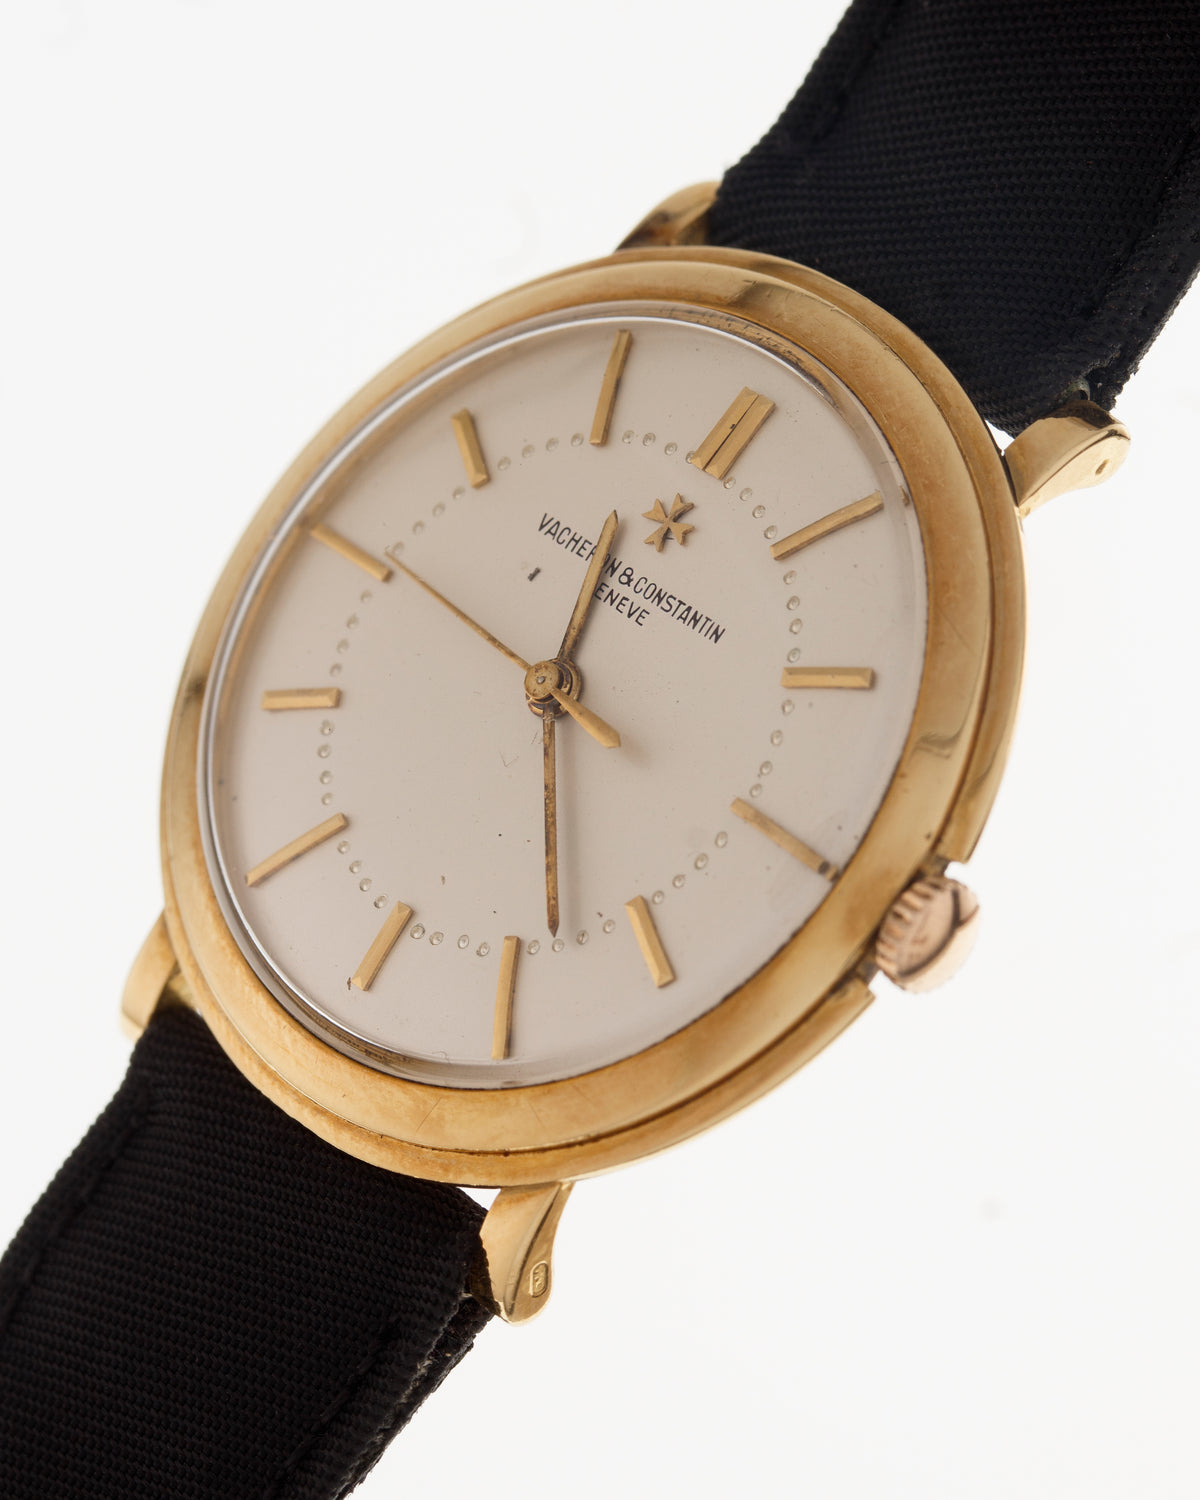 Vacheron &amp; Constantin ref. 4986 with papers